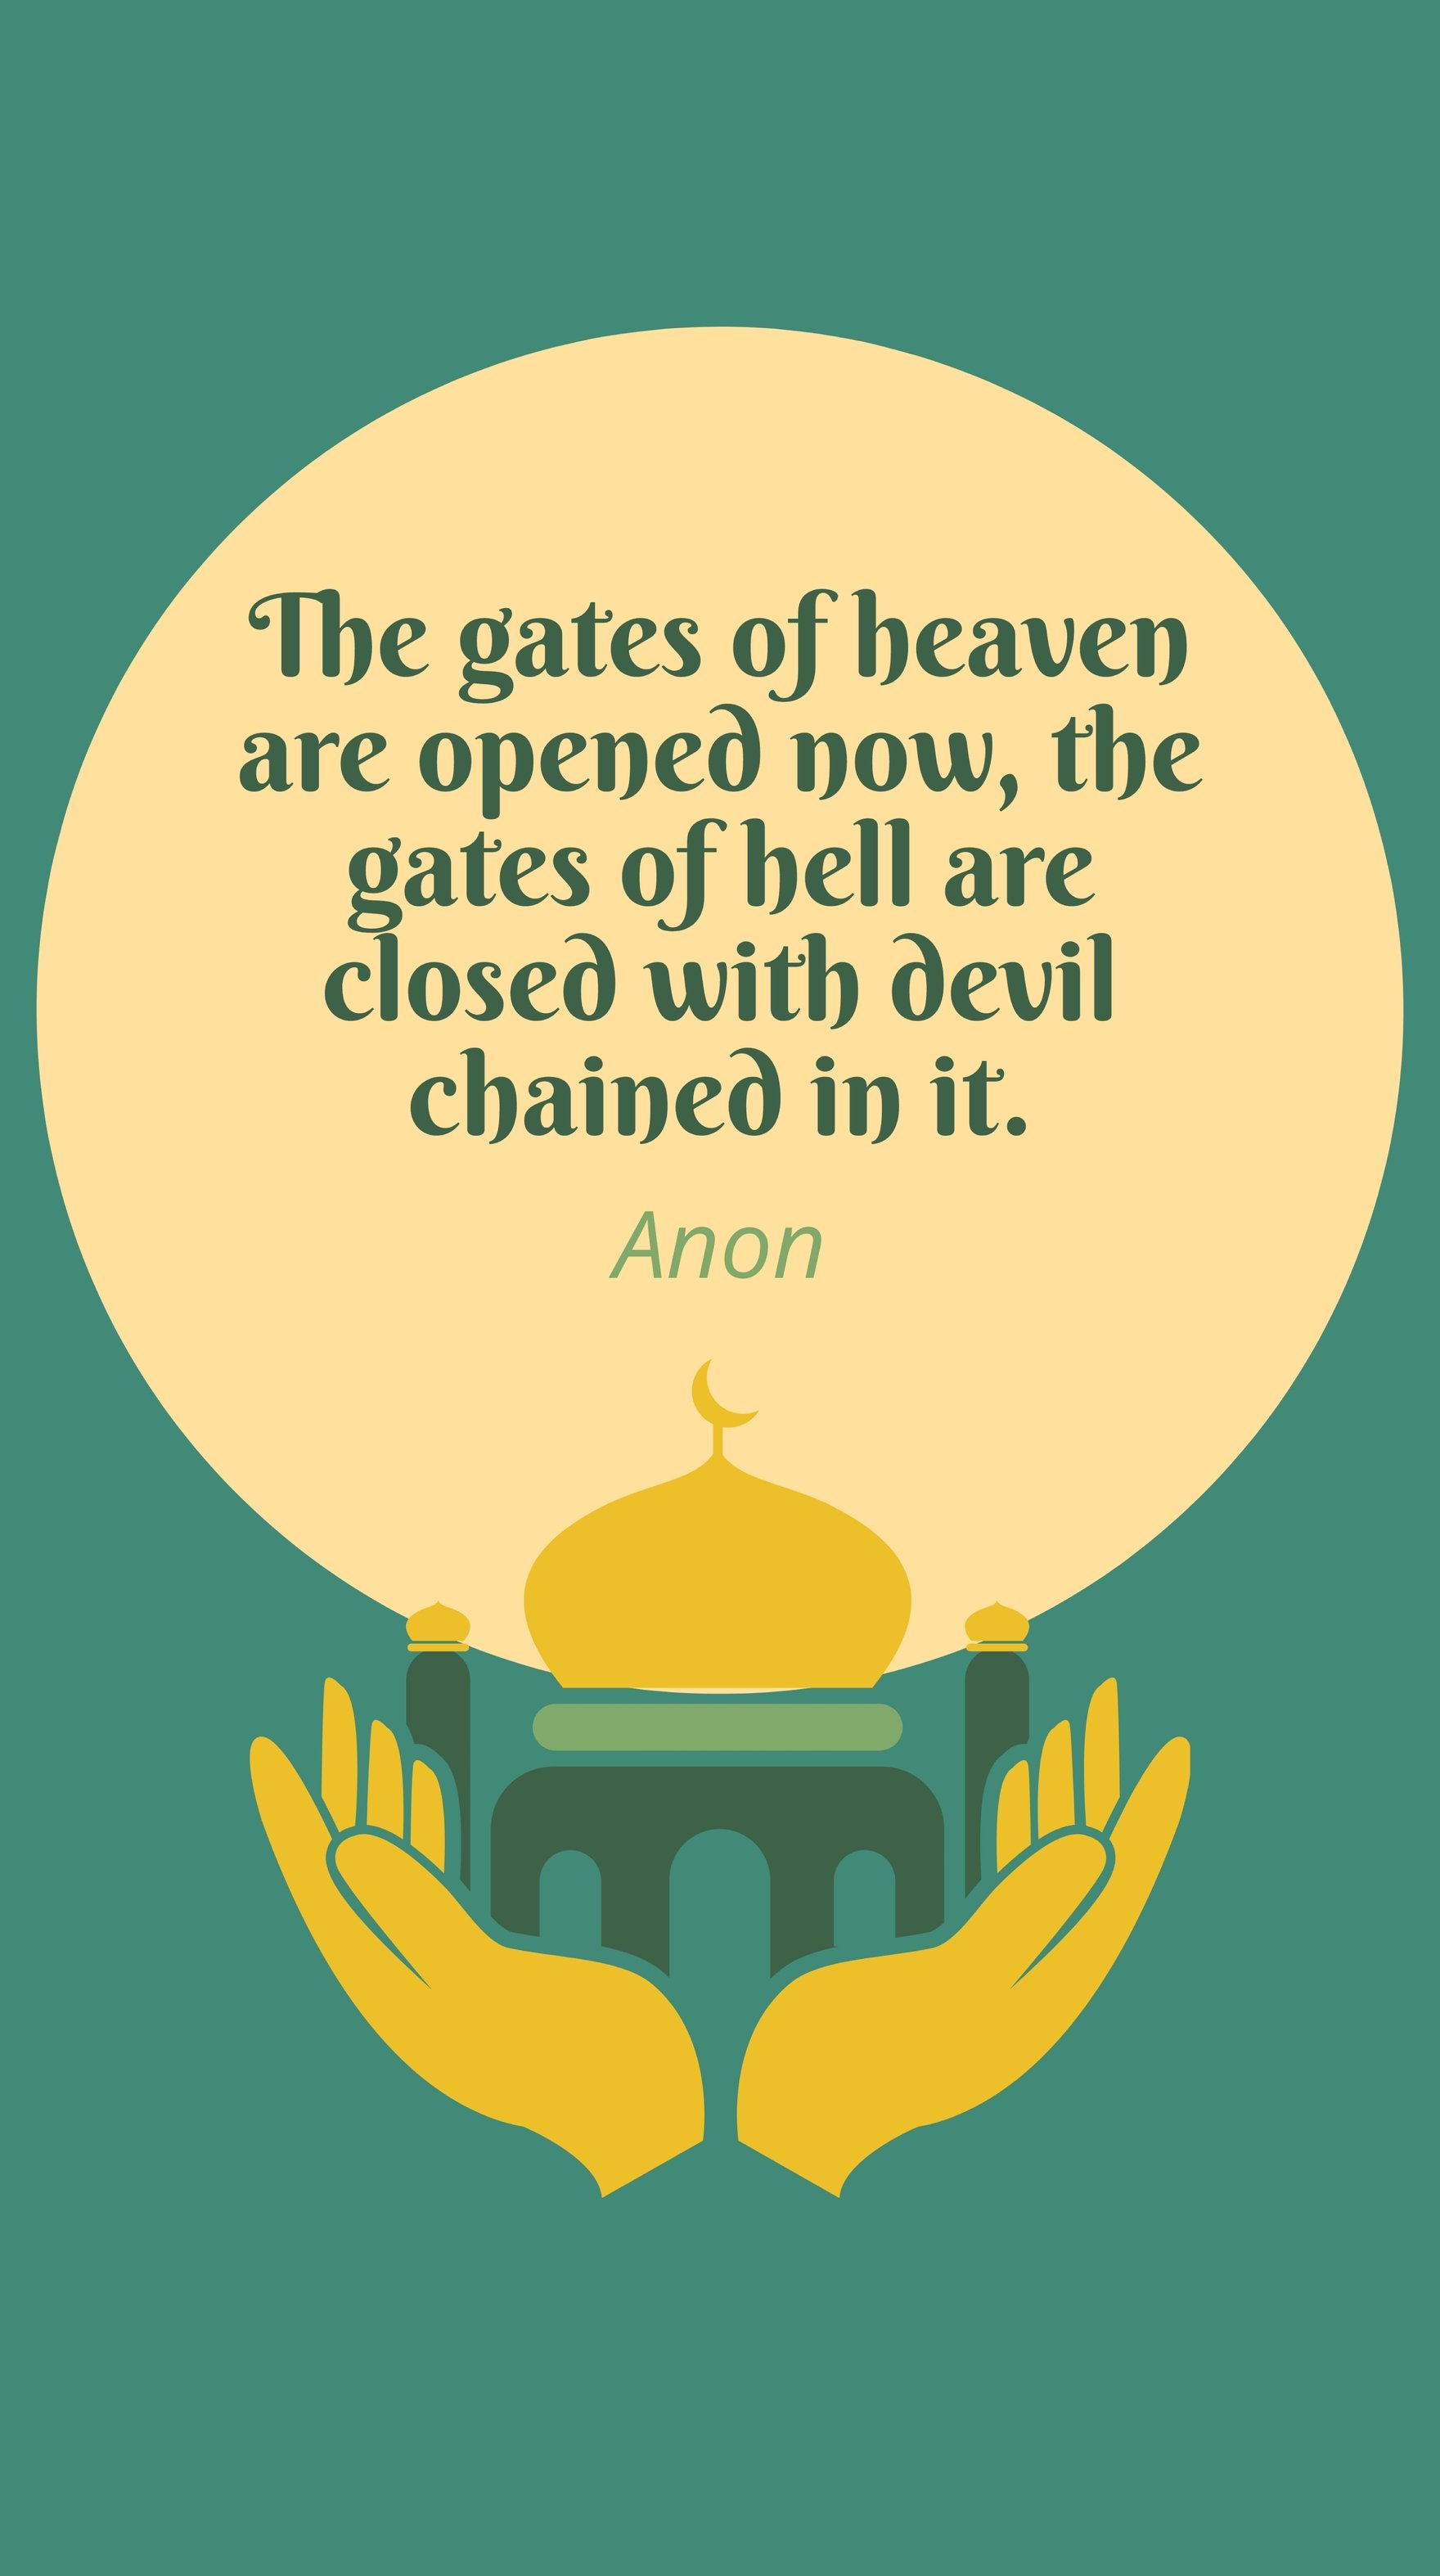 Free Anon - The gates of heaven are opened now, the gates of hell are closed with devil chained in it.